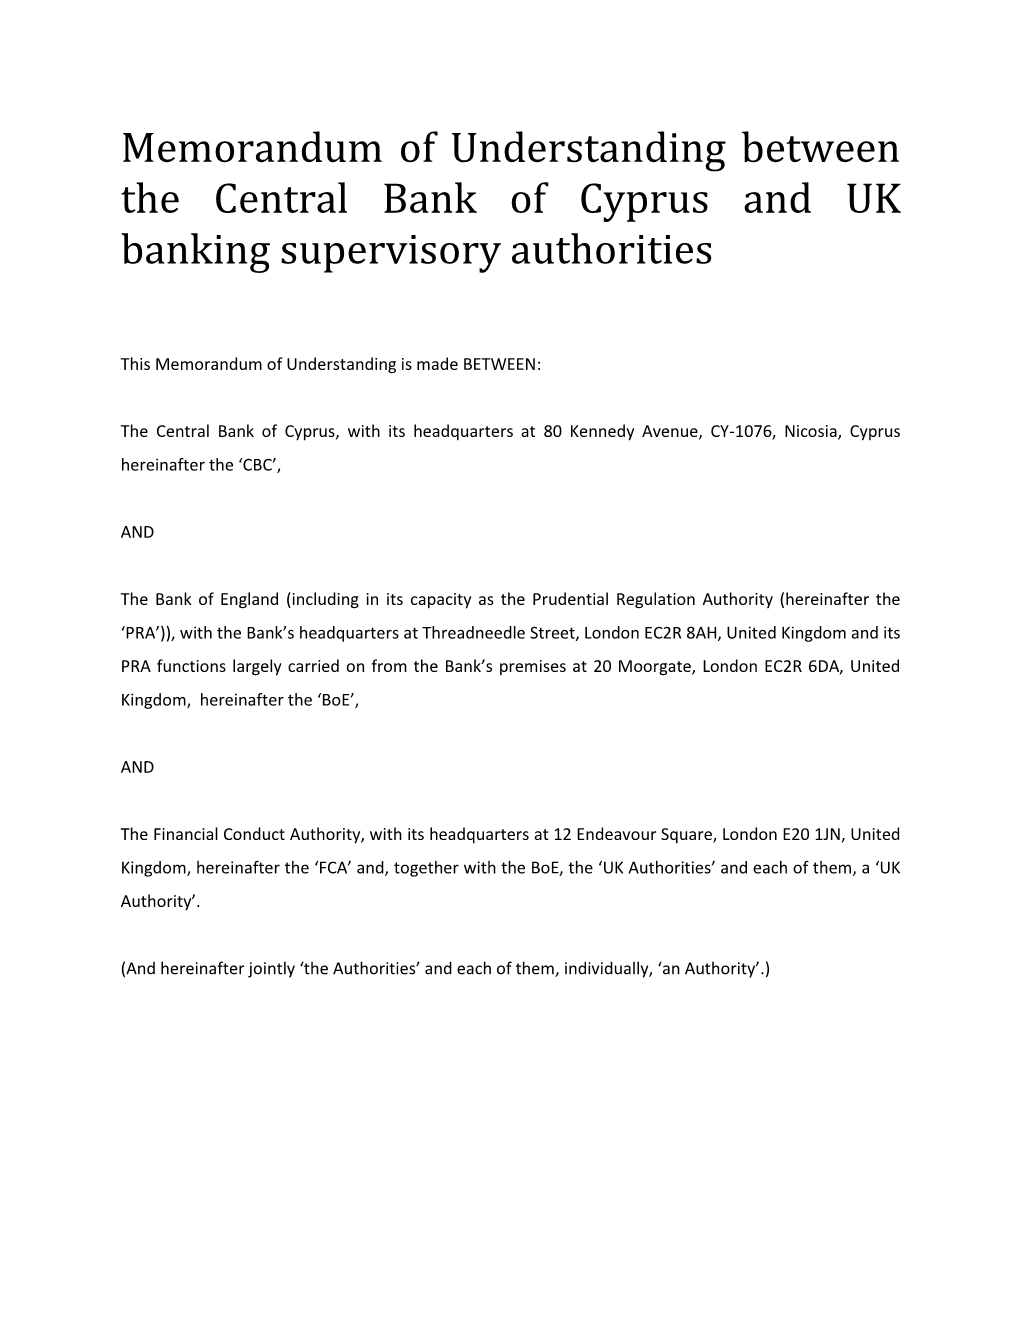 Mou Between the Central Bank of Cyprus and UK Banking